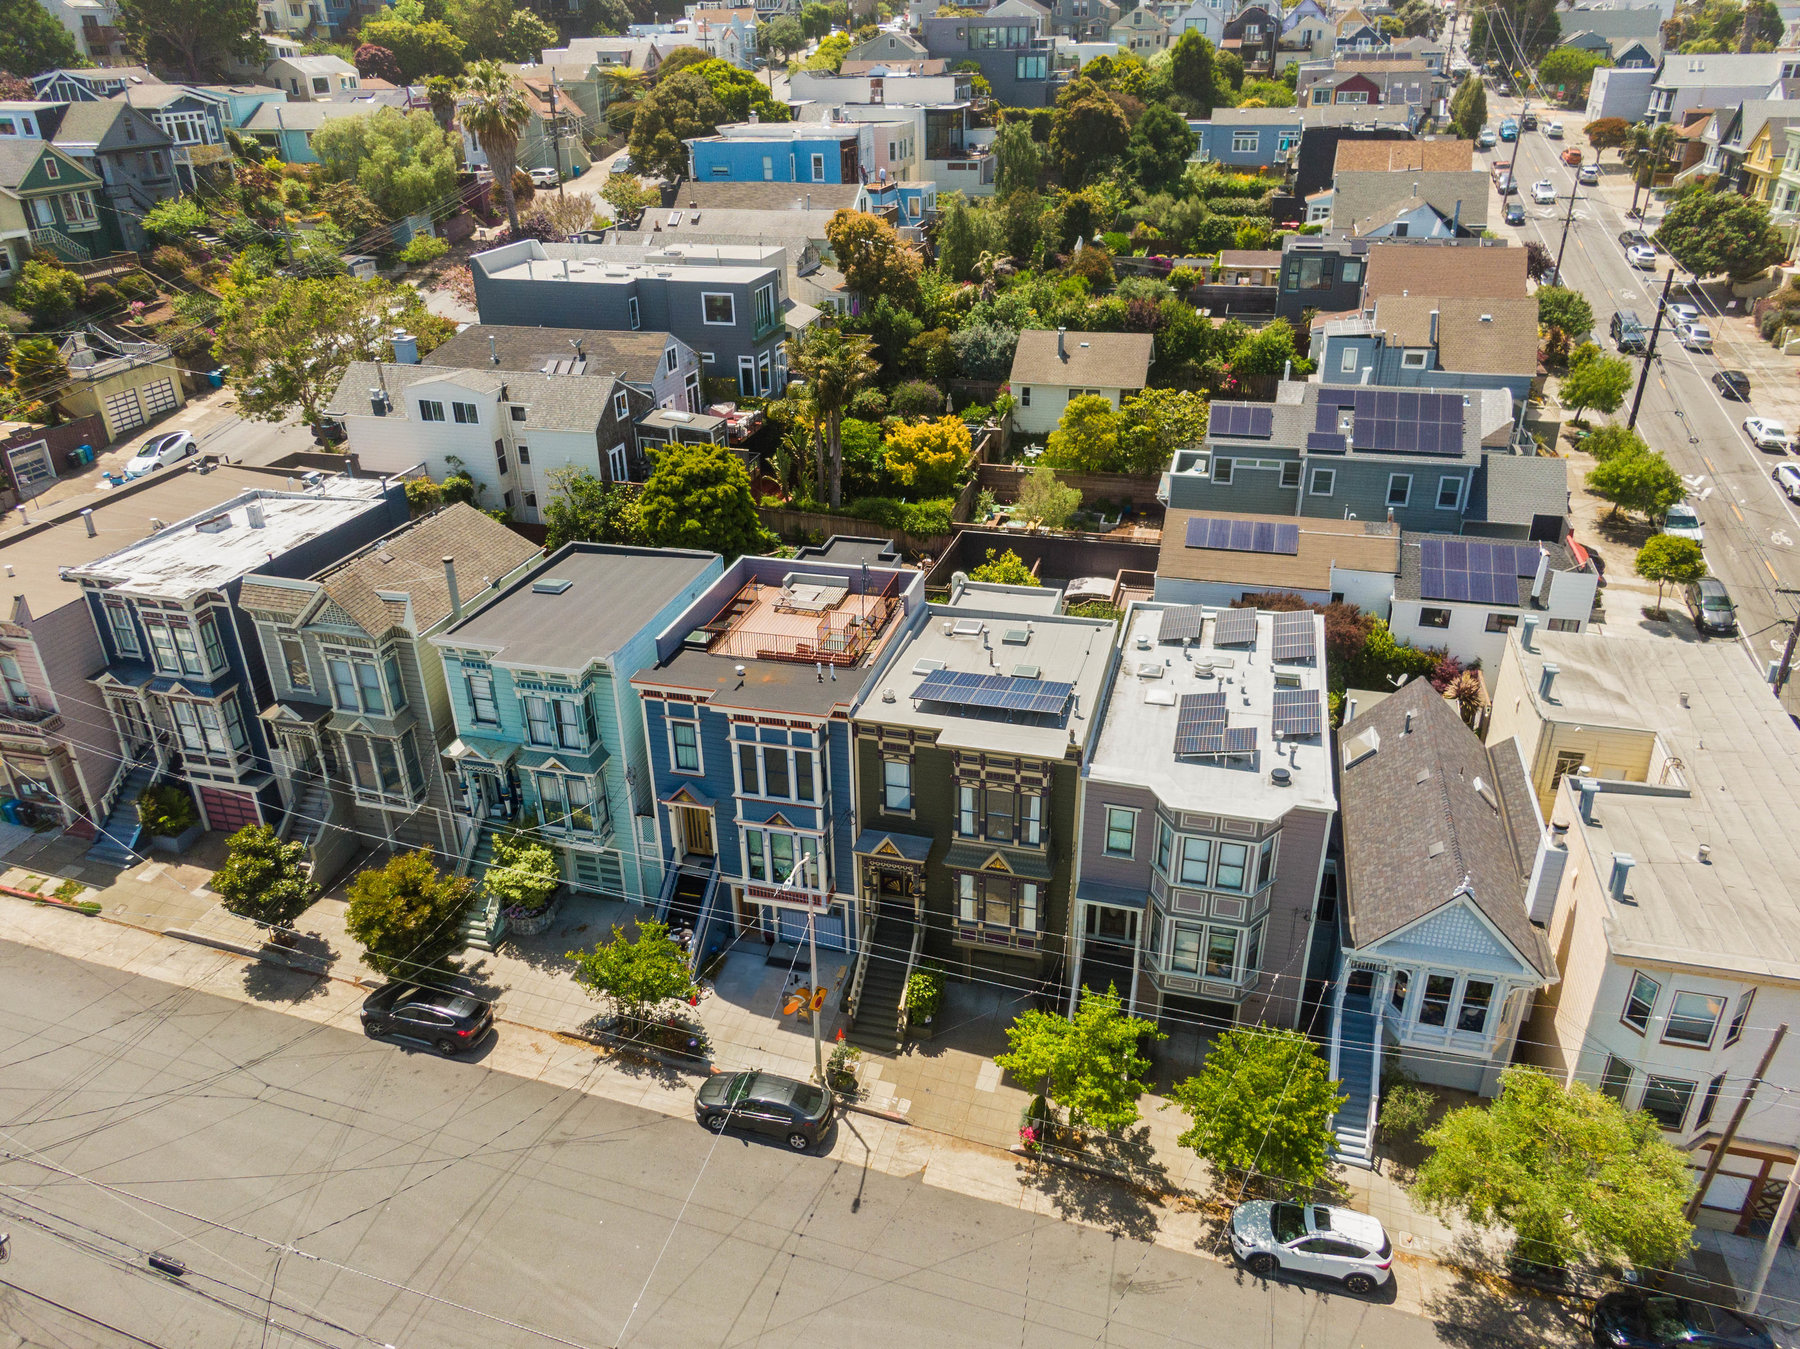 Property Photo: Another aerial photo of Castro street neighbors. 